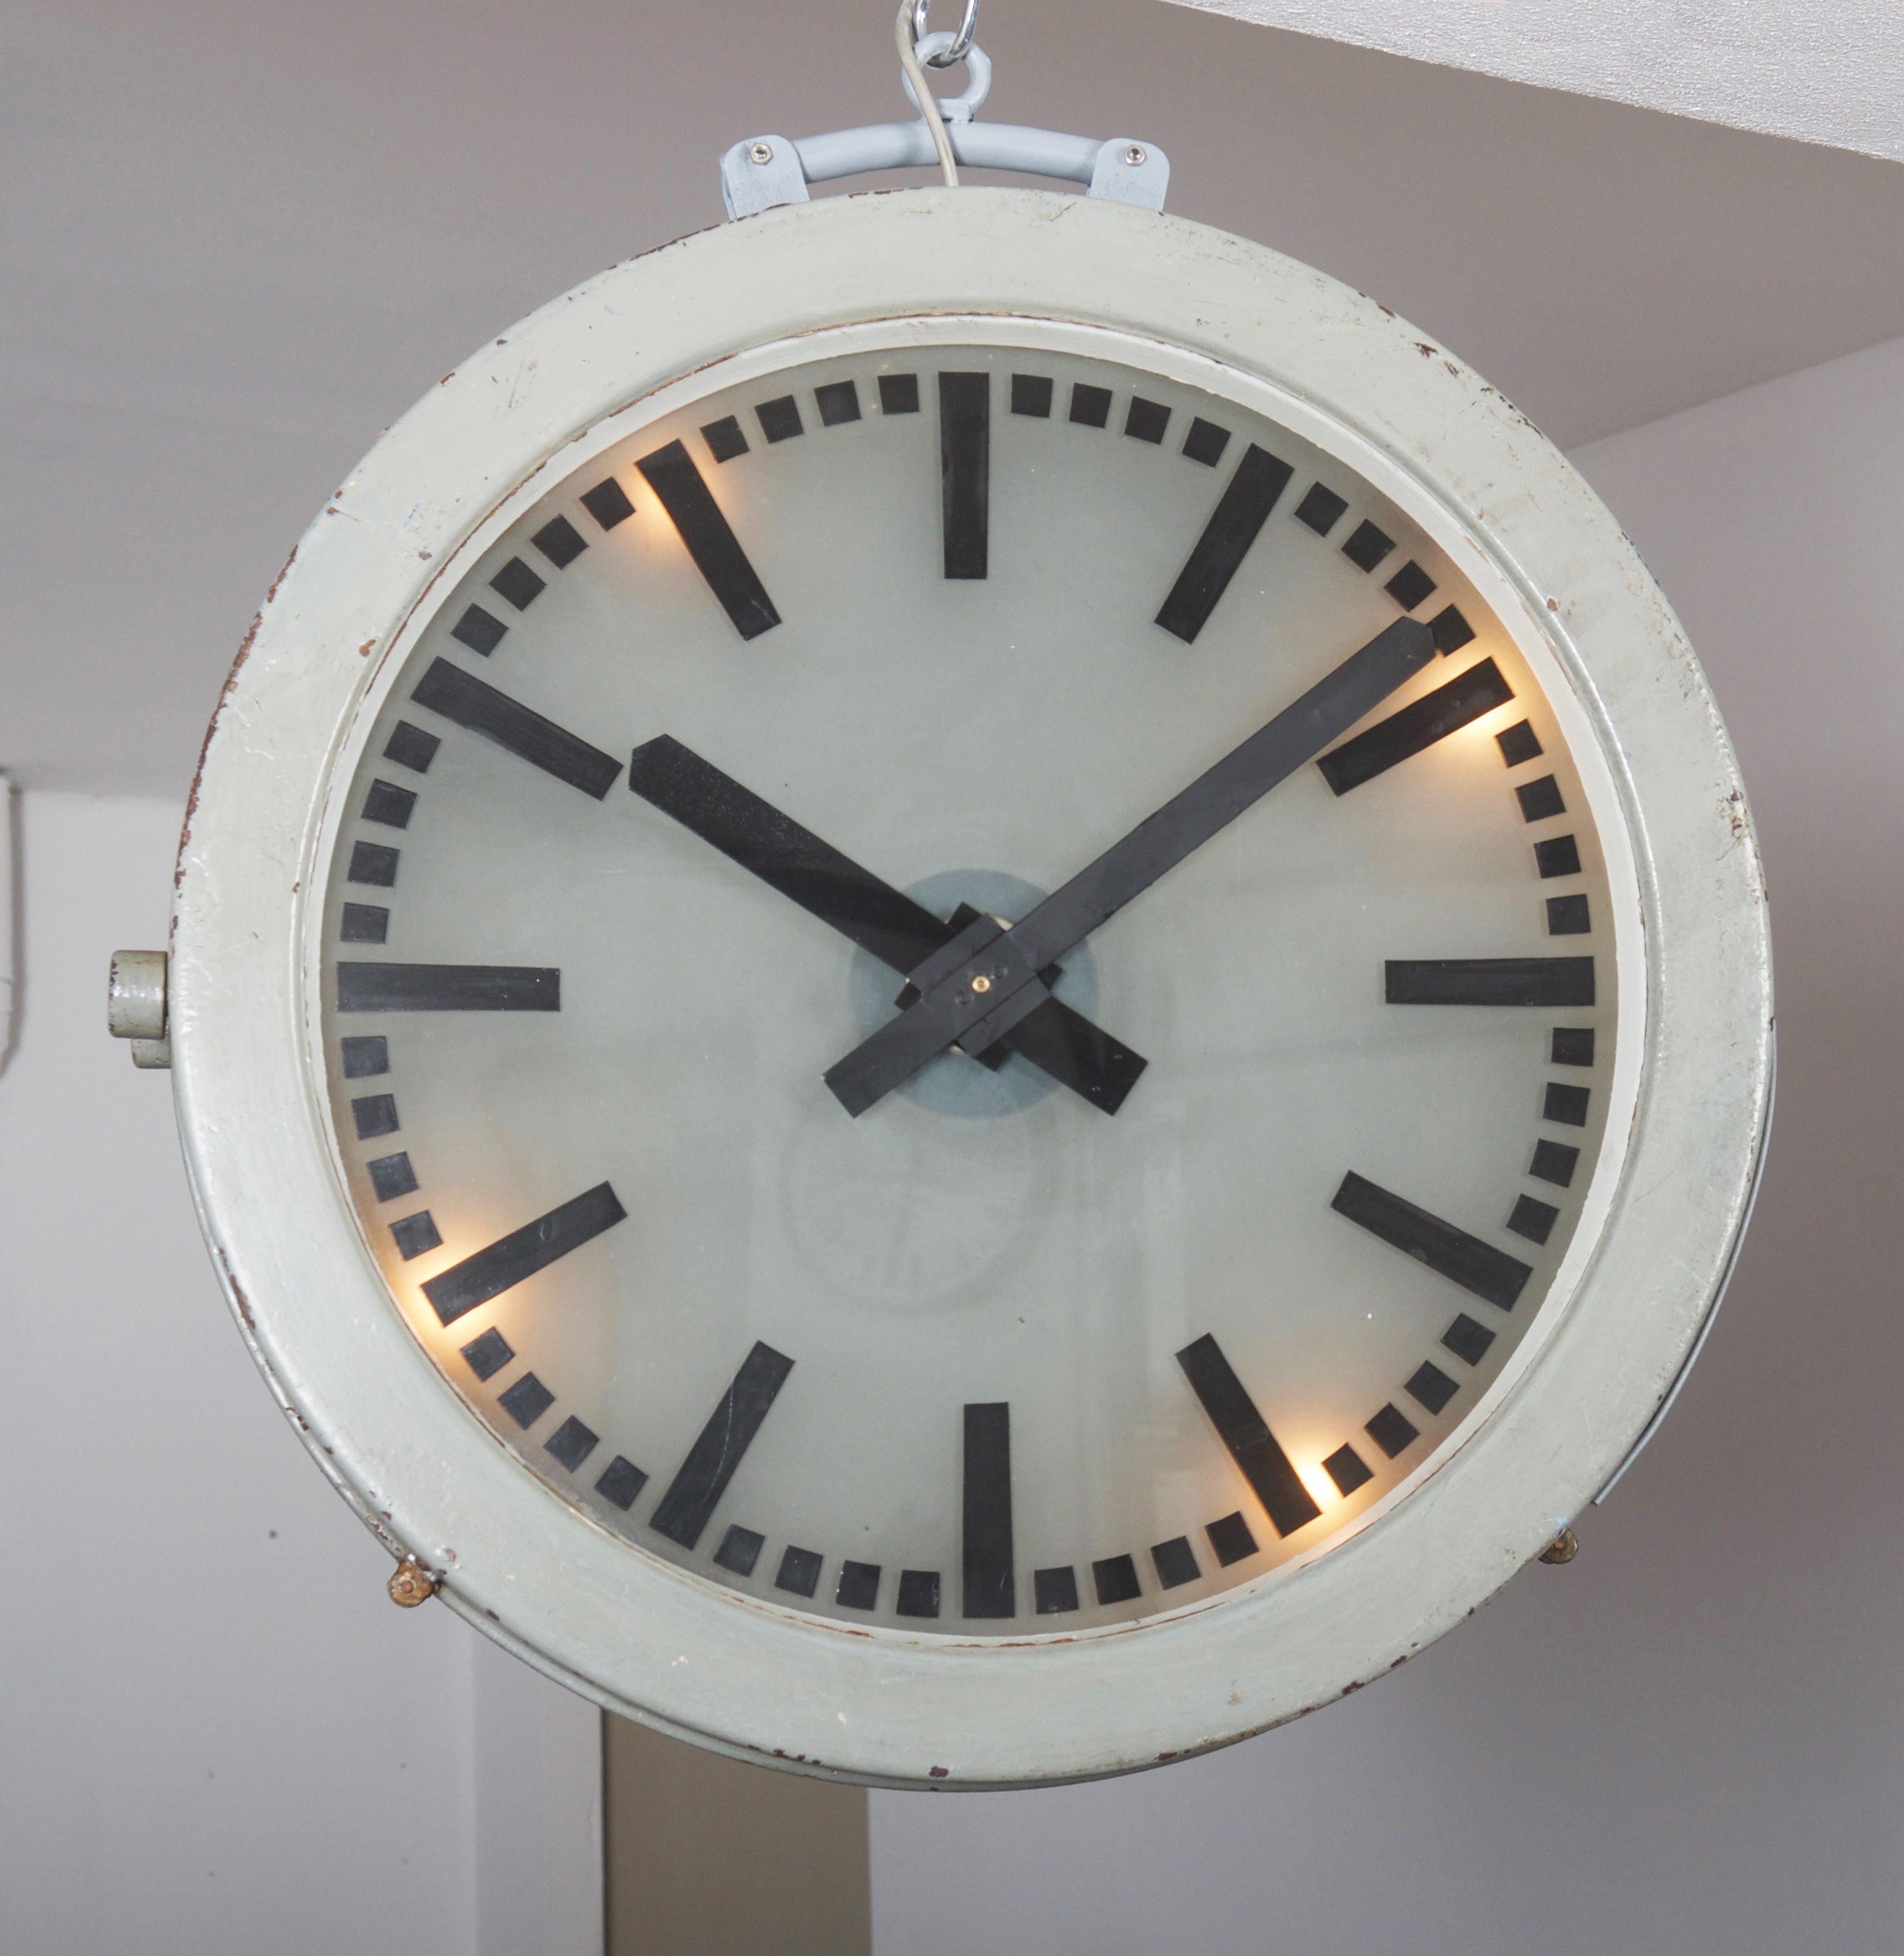 Large German station or factory clock probably by Telenorma (TN) or Siemens Halske from the early 1930s. Steel frame paited with 2 glass clock faces fitted with 4 E14 bulbs, formerly as a slave clock with mechanical movement but now rebuild to a